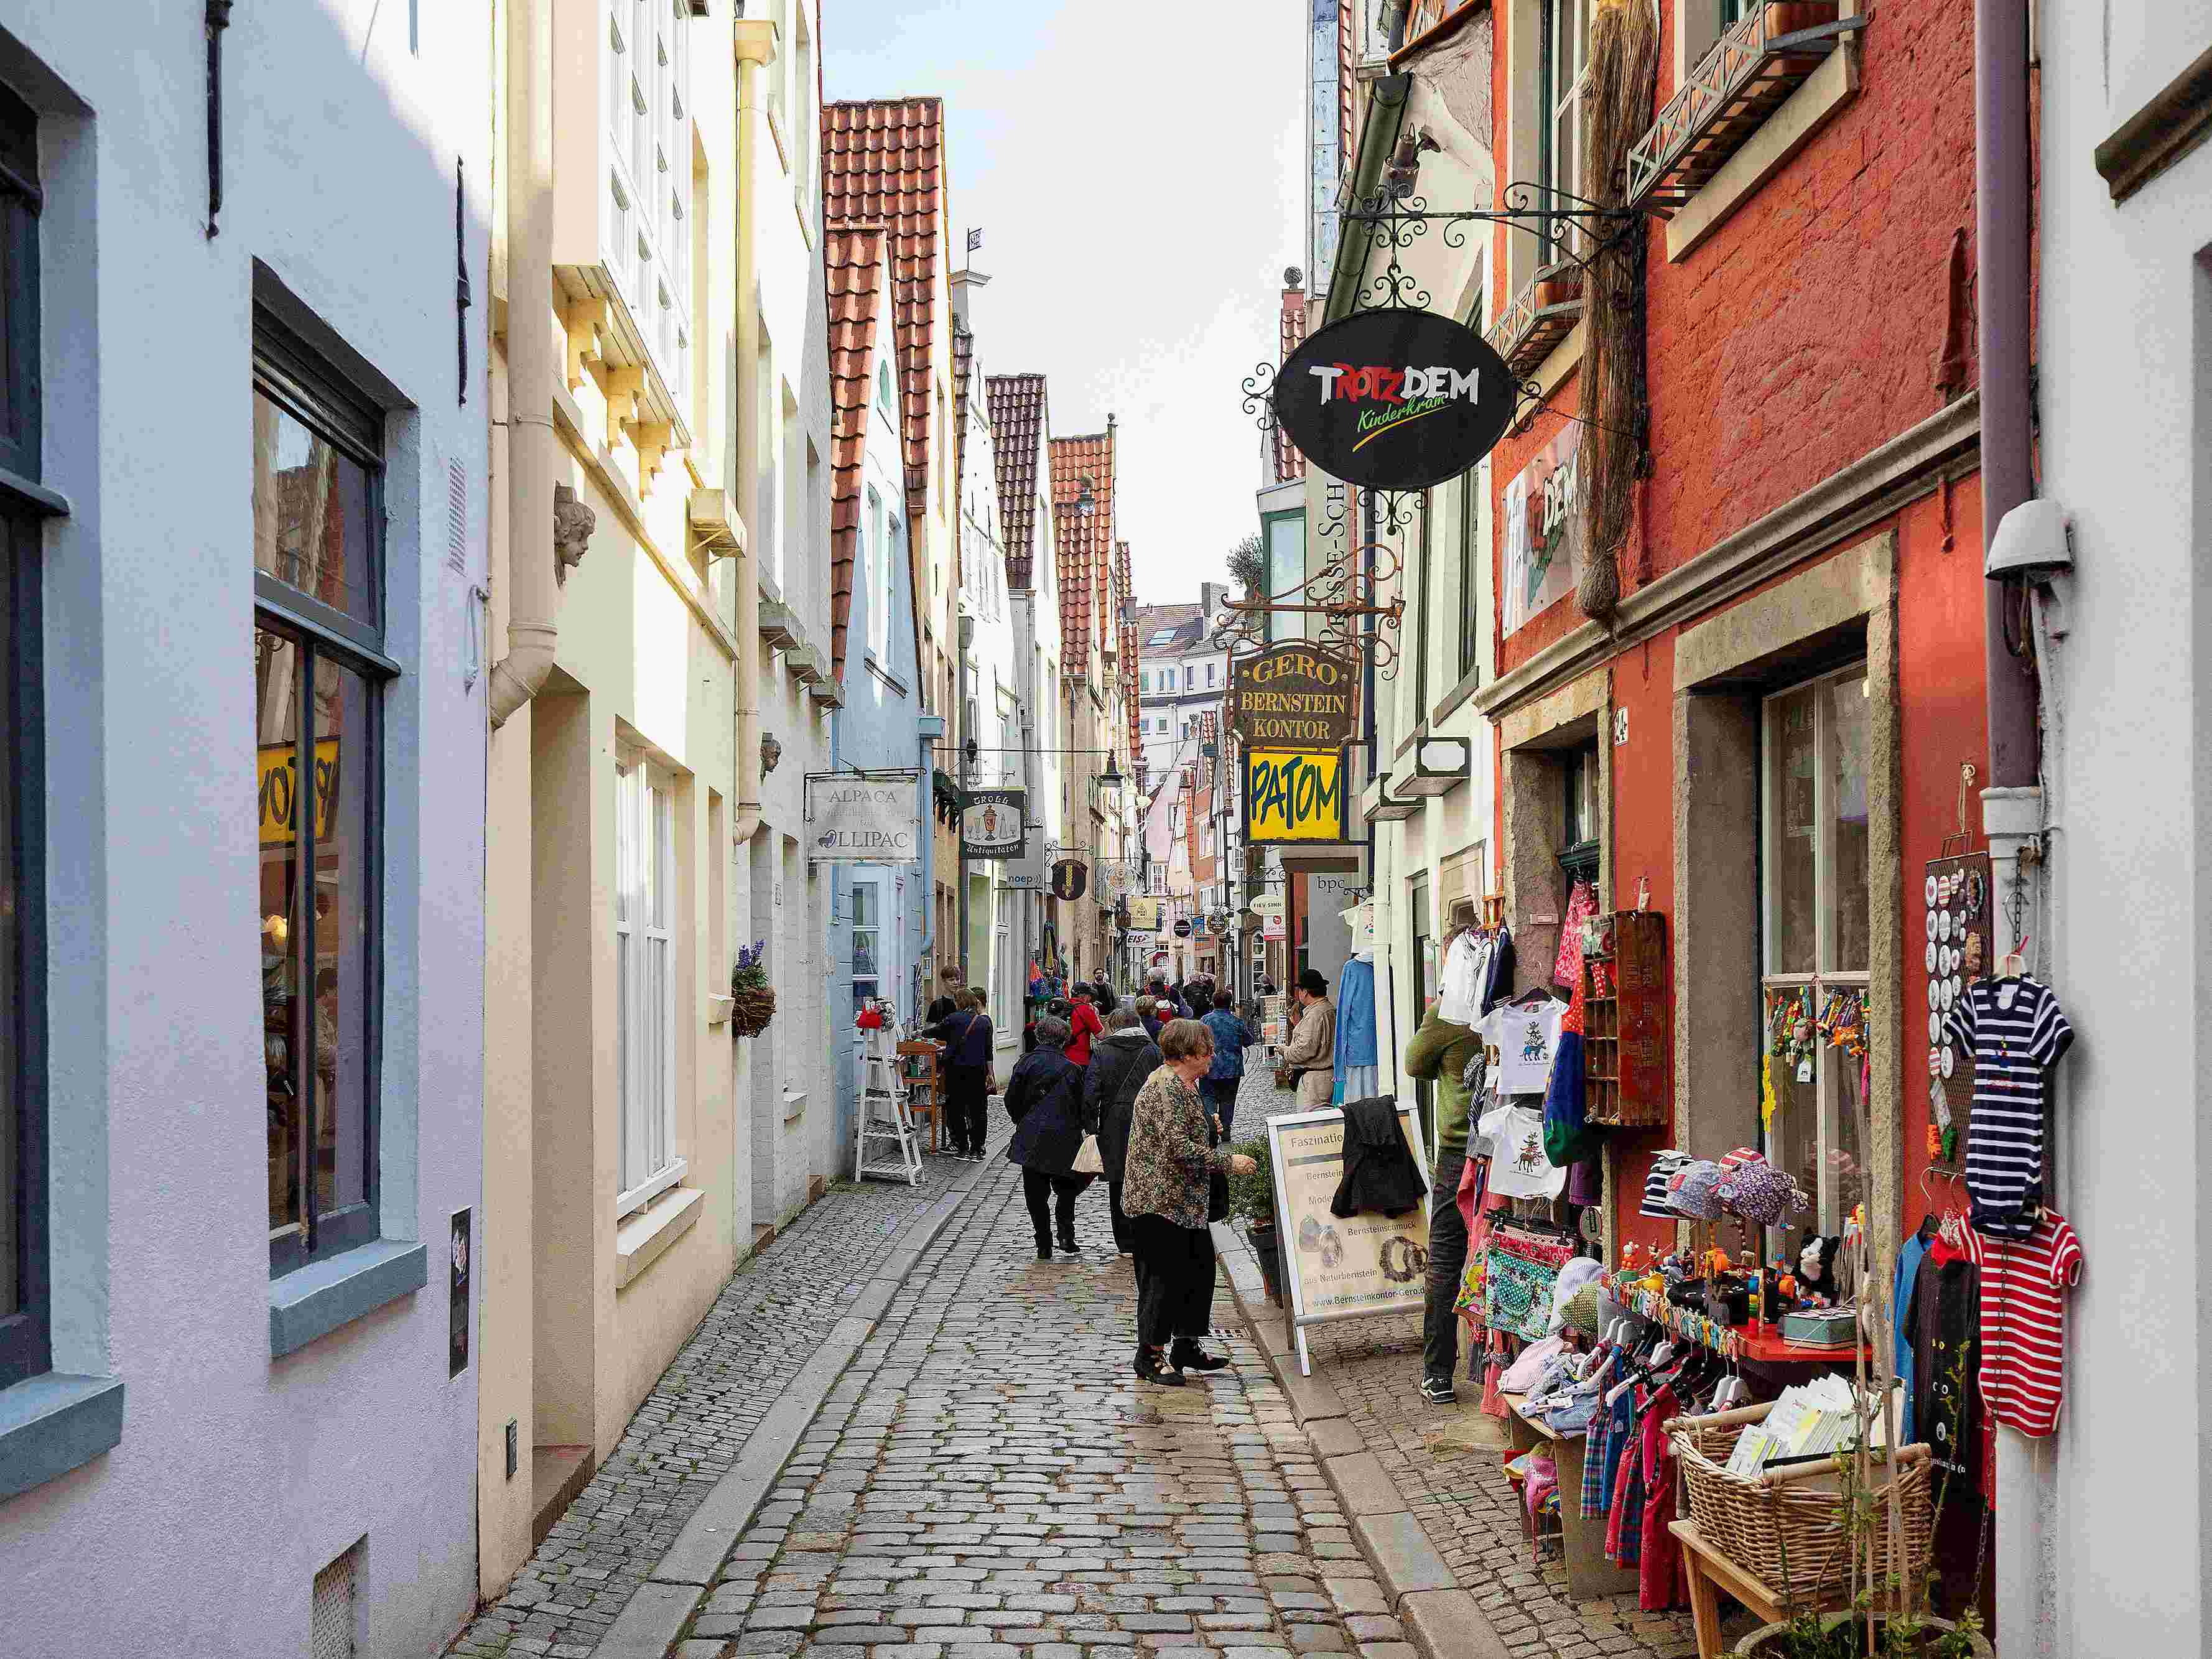 Speciality shops open onto cobbled alleyways in the old town.